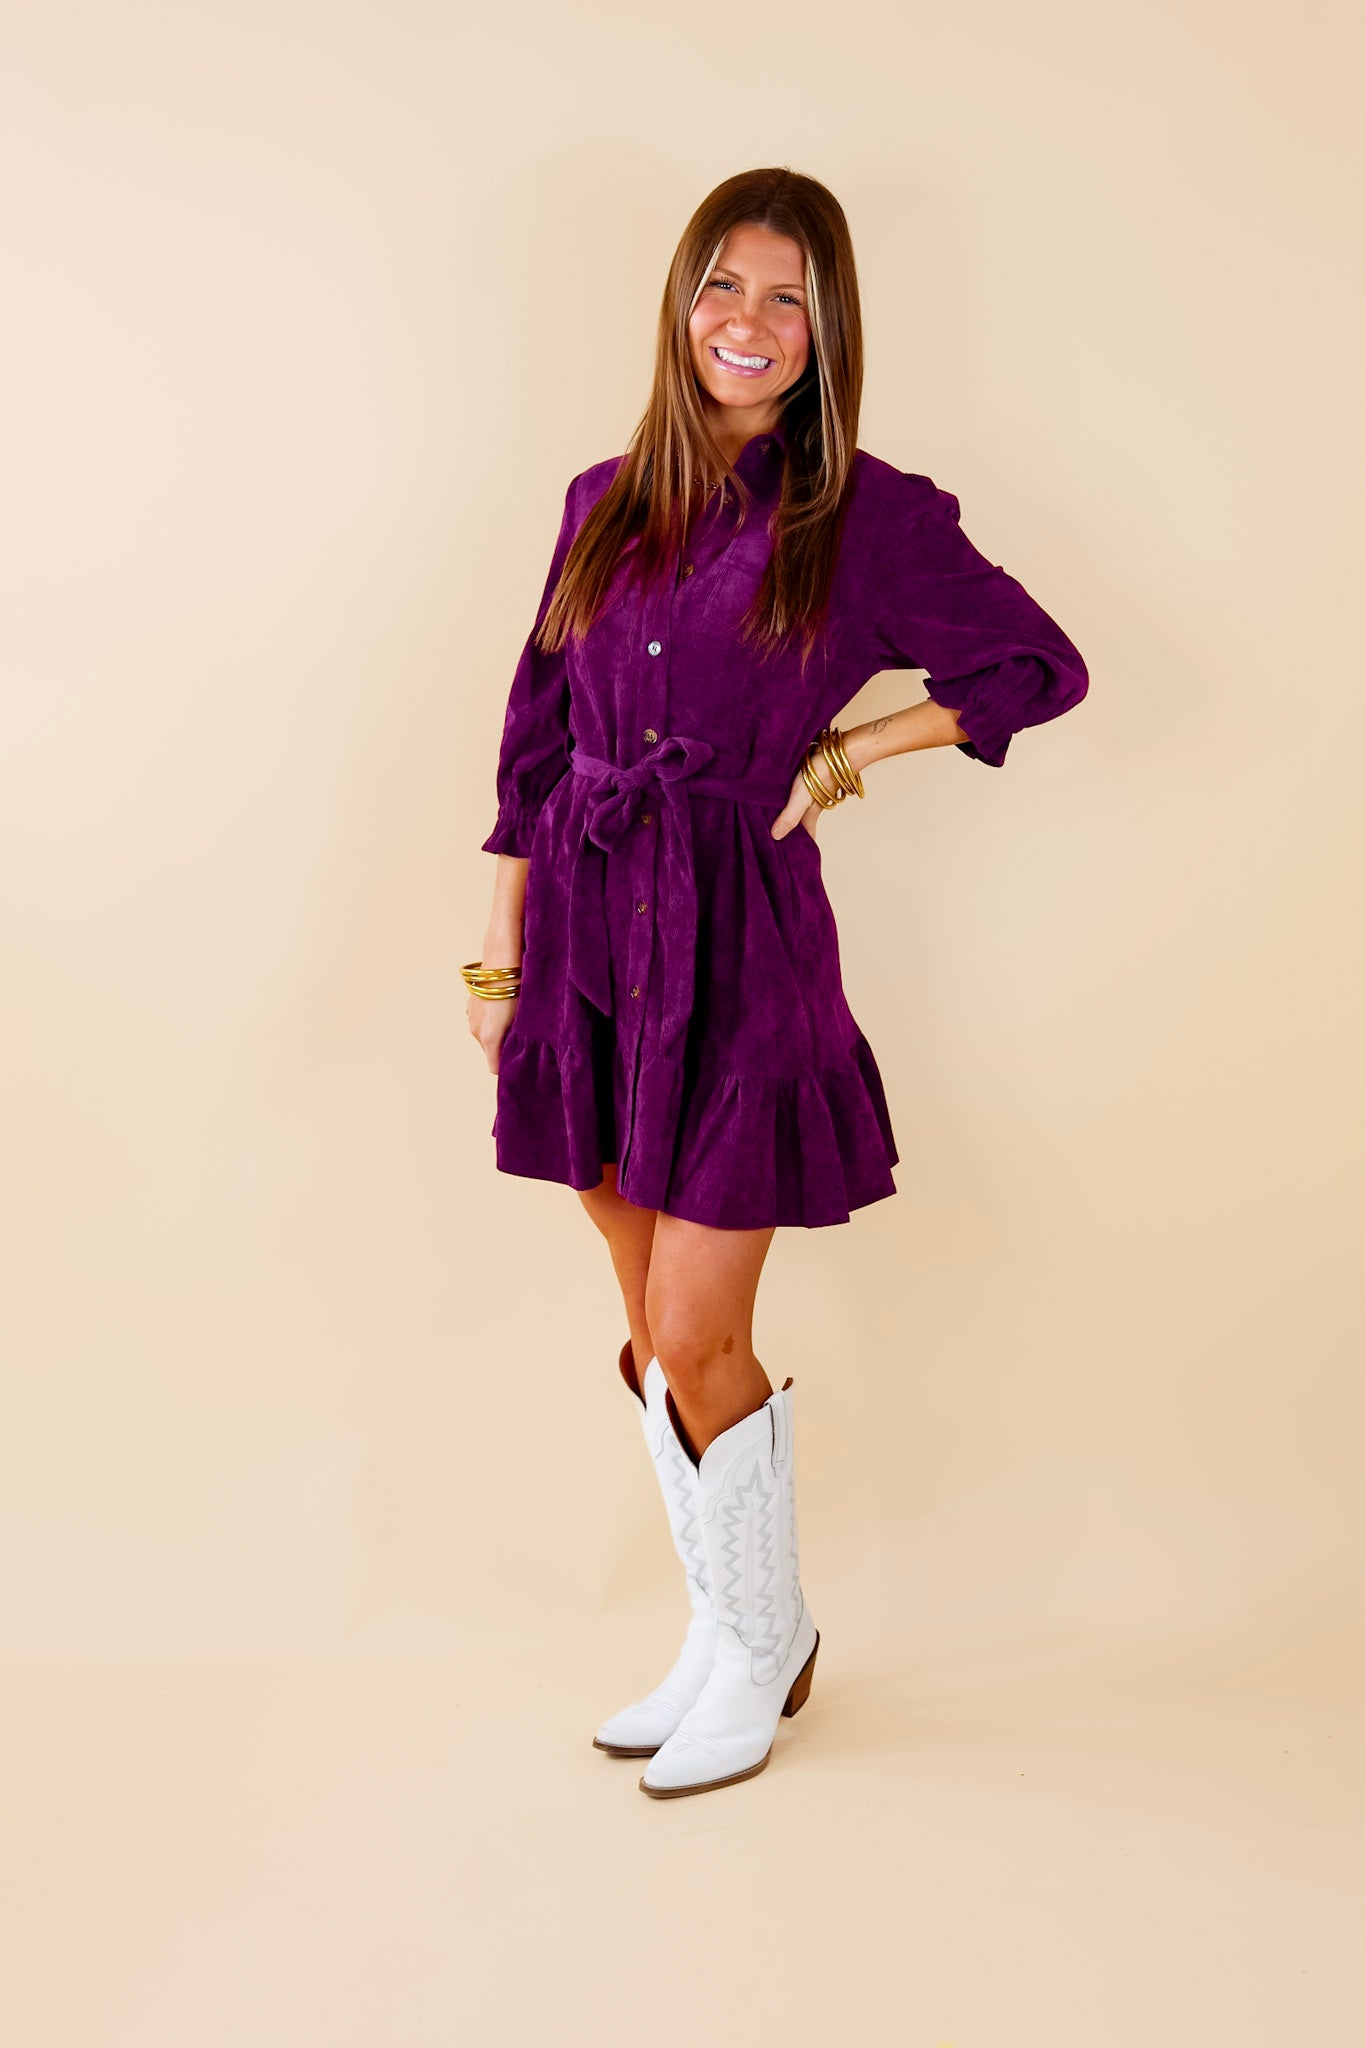 Cinnamon Lane Button Up Corduroy Dress with Waist Tie in Violet Purple - Giddy Up Glamour Boutique